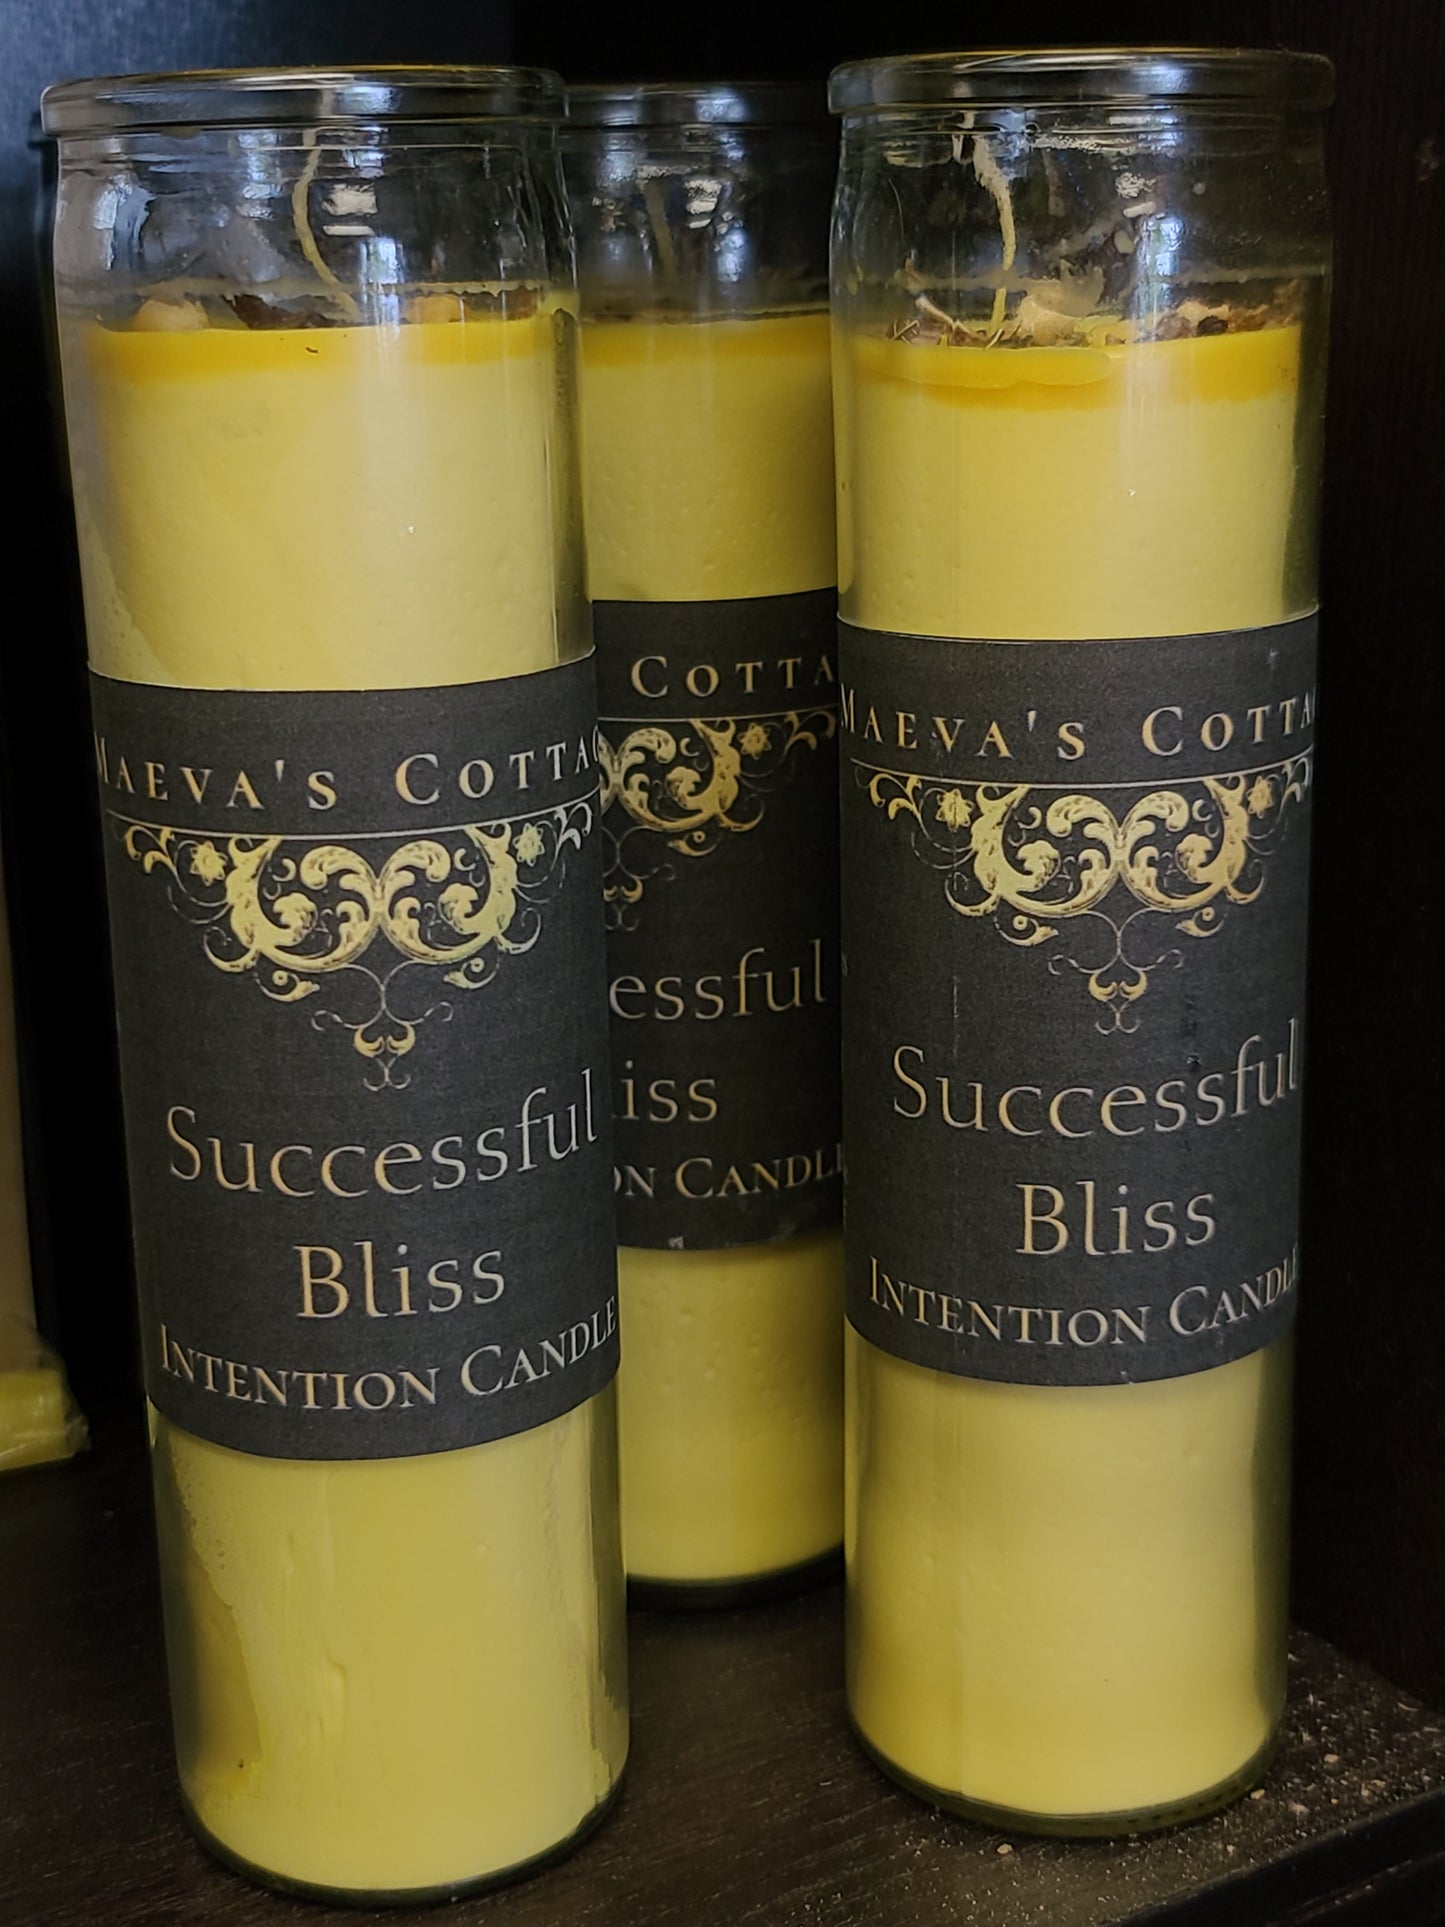 Successful Bliss Spell Candle by Maeva